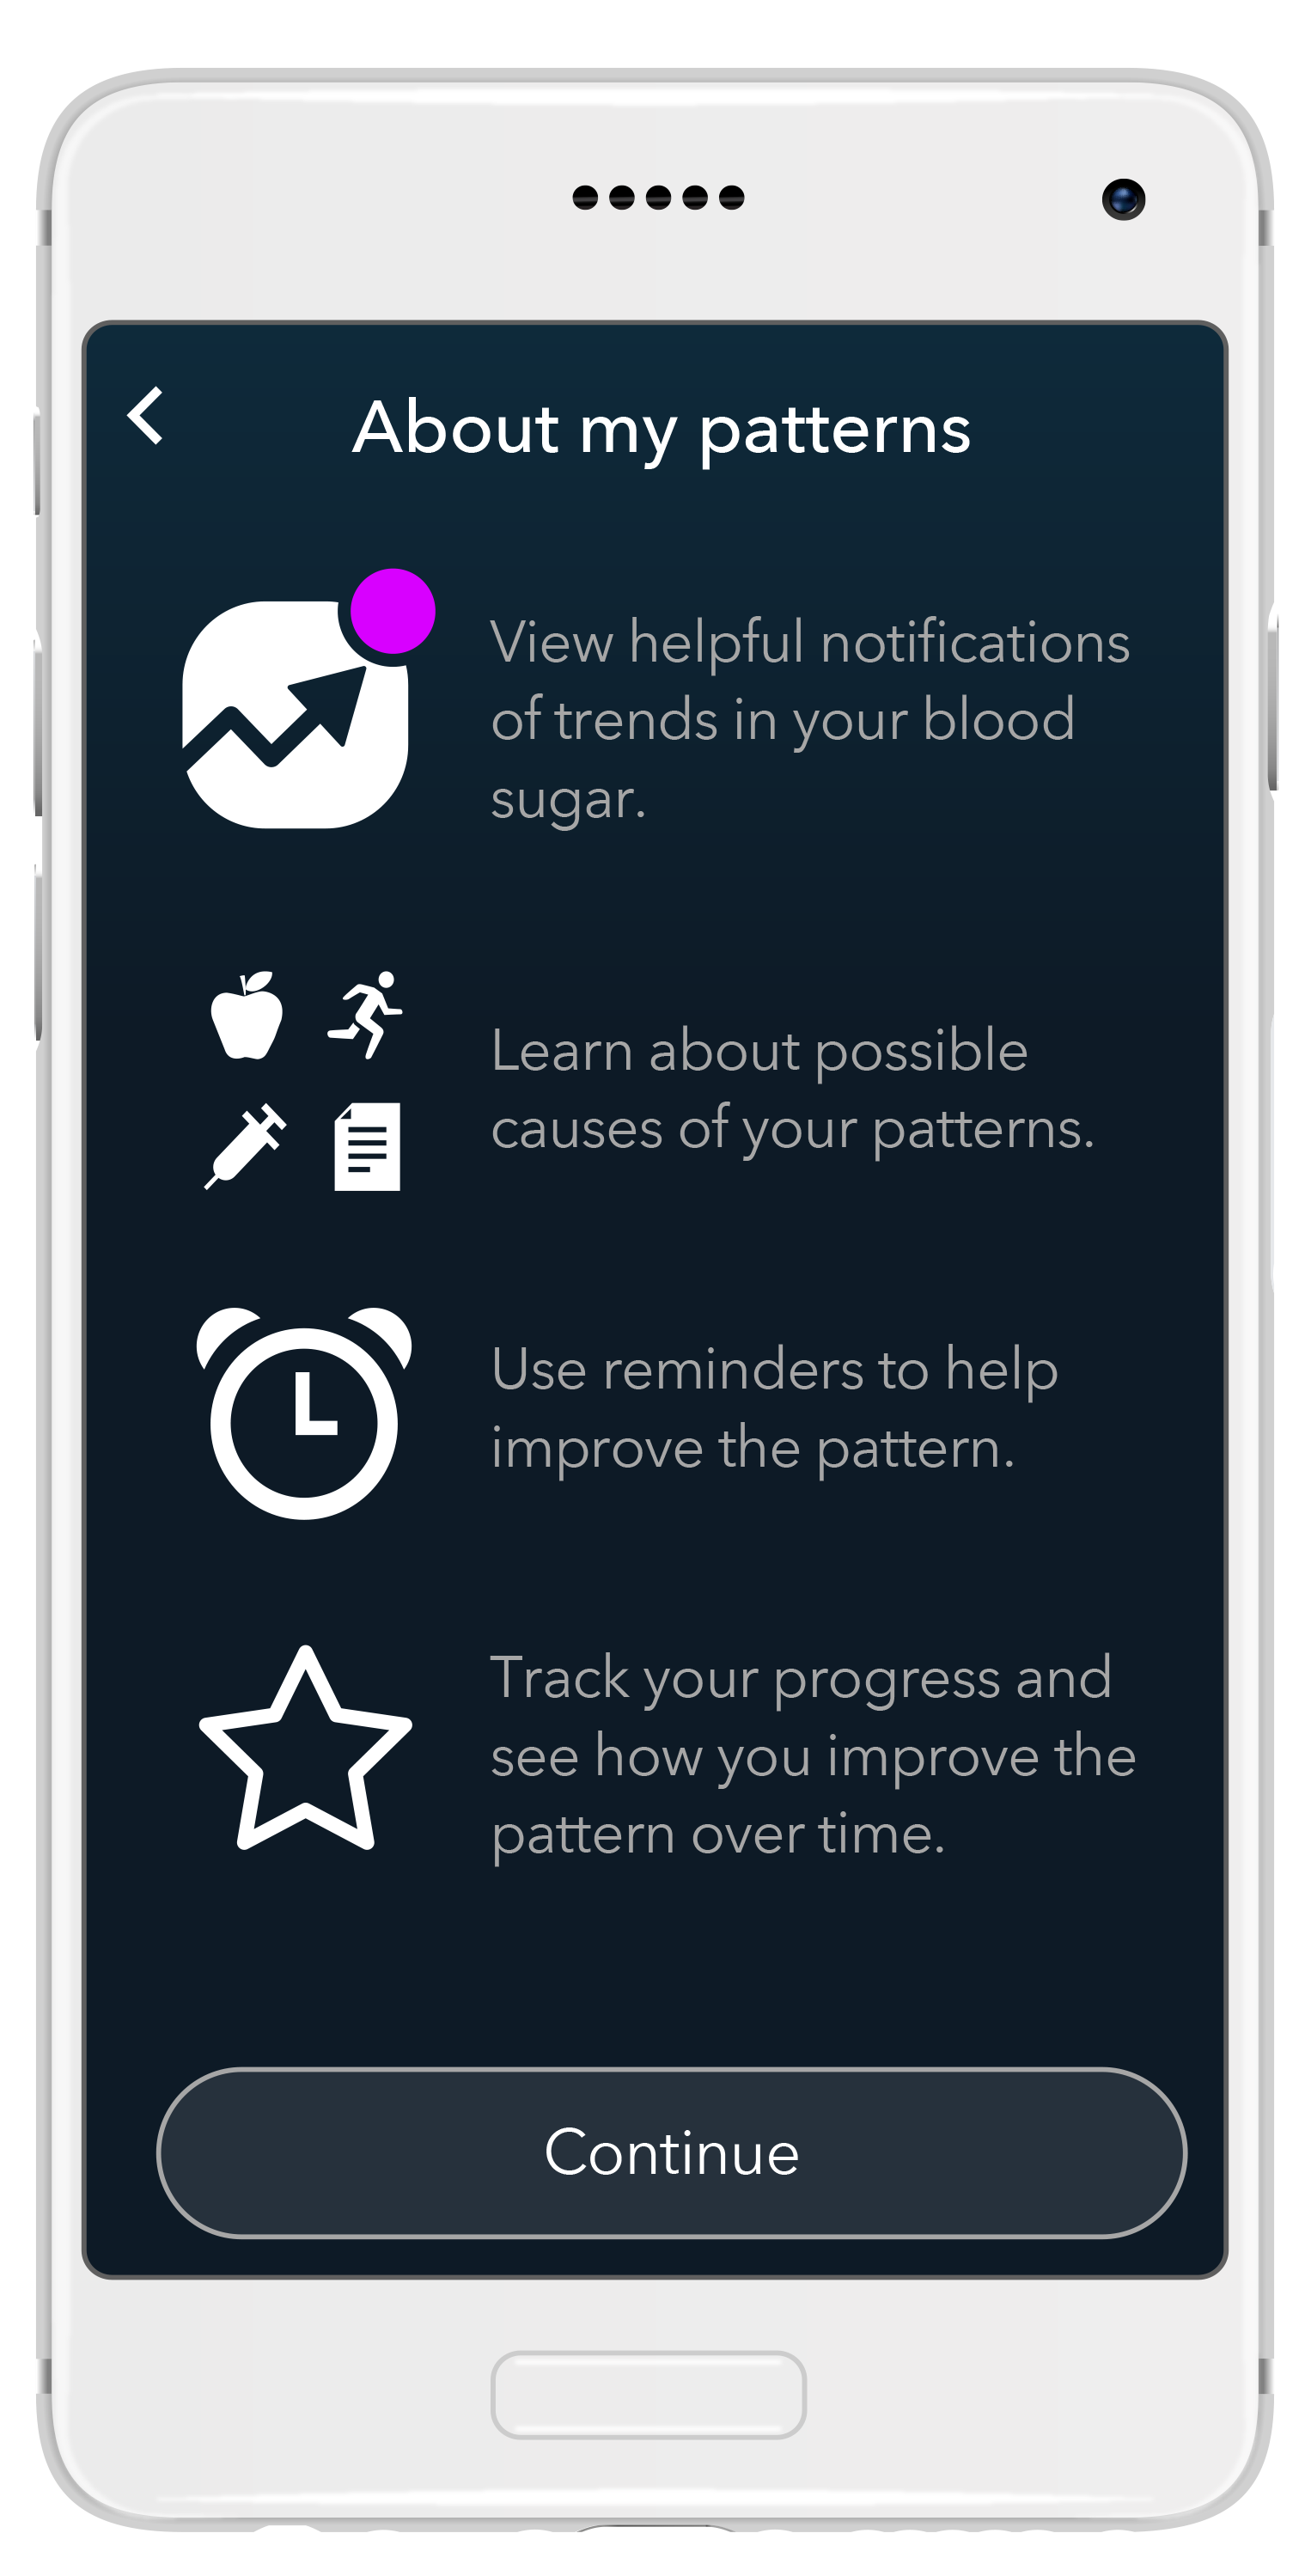 The app provides options for personalized testing